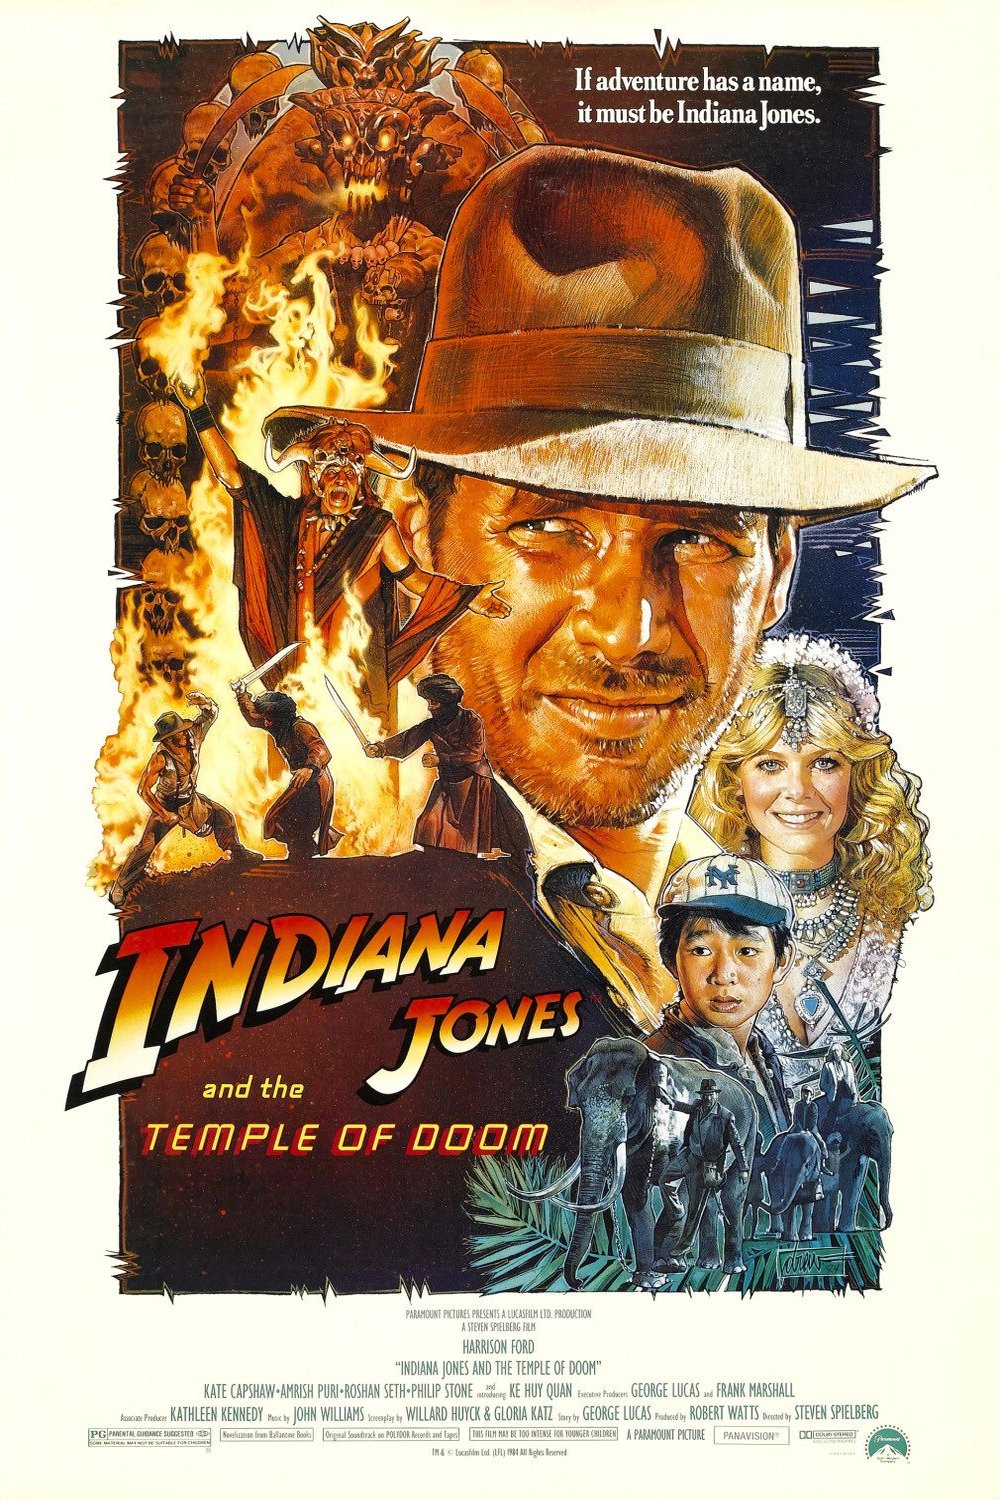 Poster of the movie Indiana Jones and the Temple of Doom